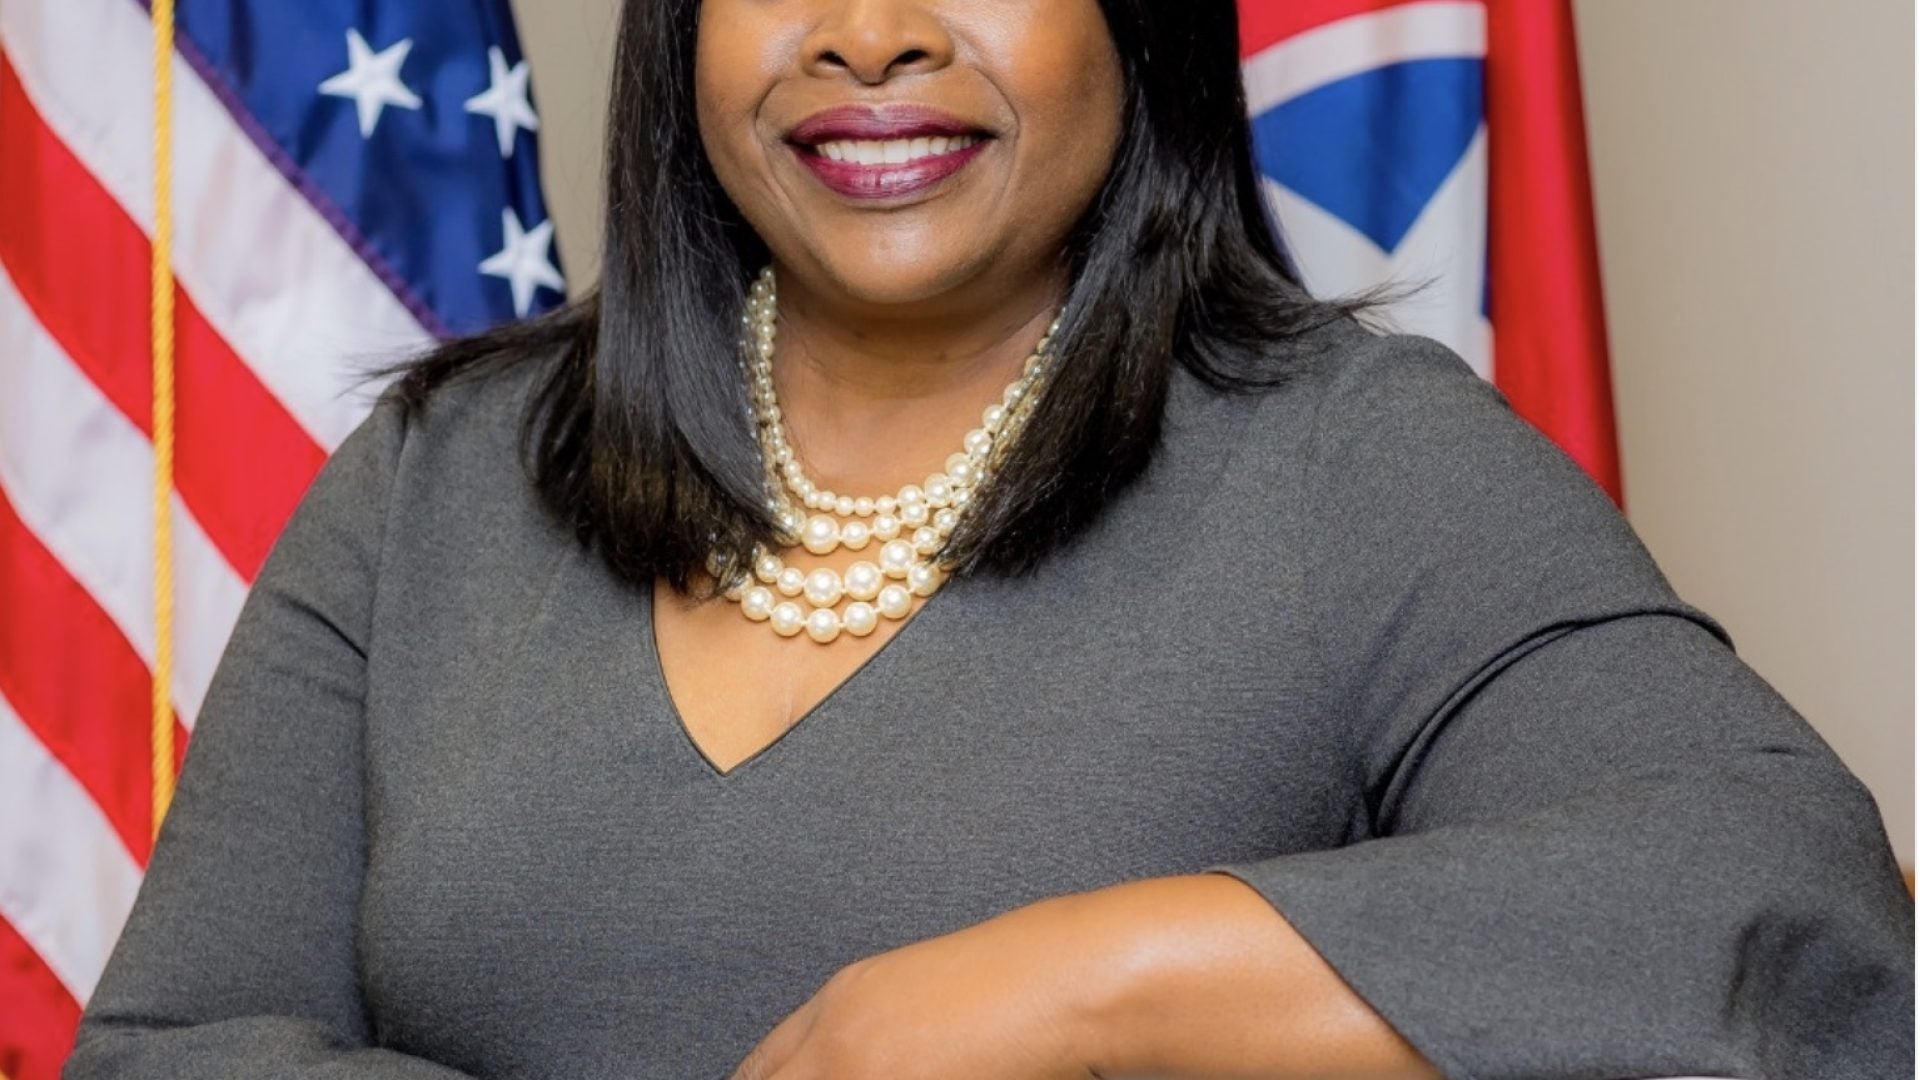 Tennessee Community College Mourns The Loss Of President, Dr.Orinthia Montague